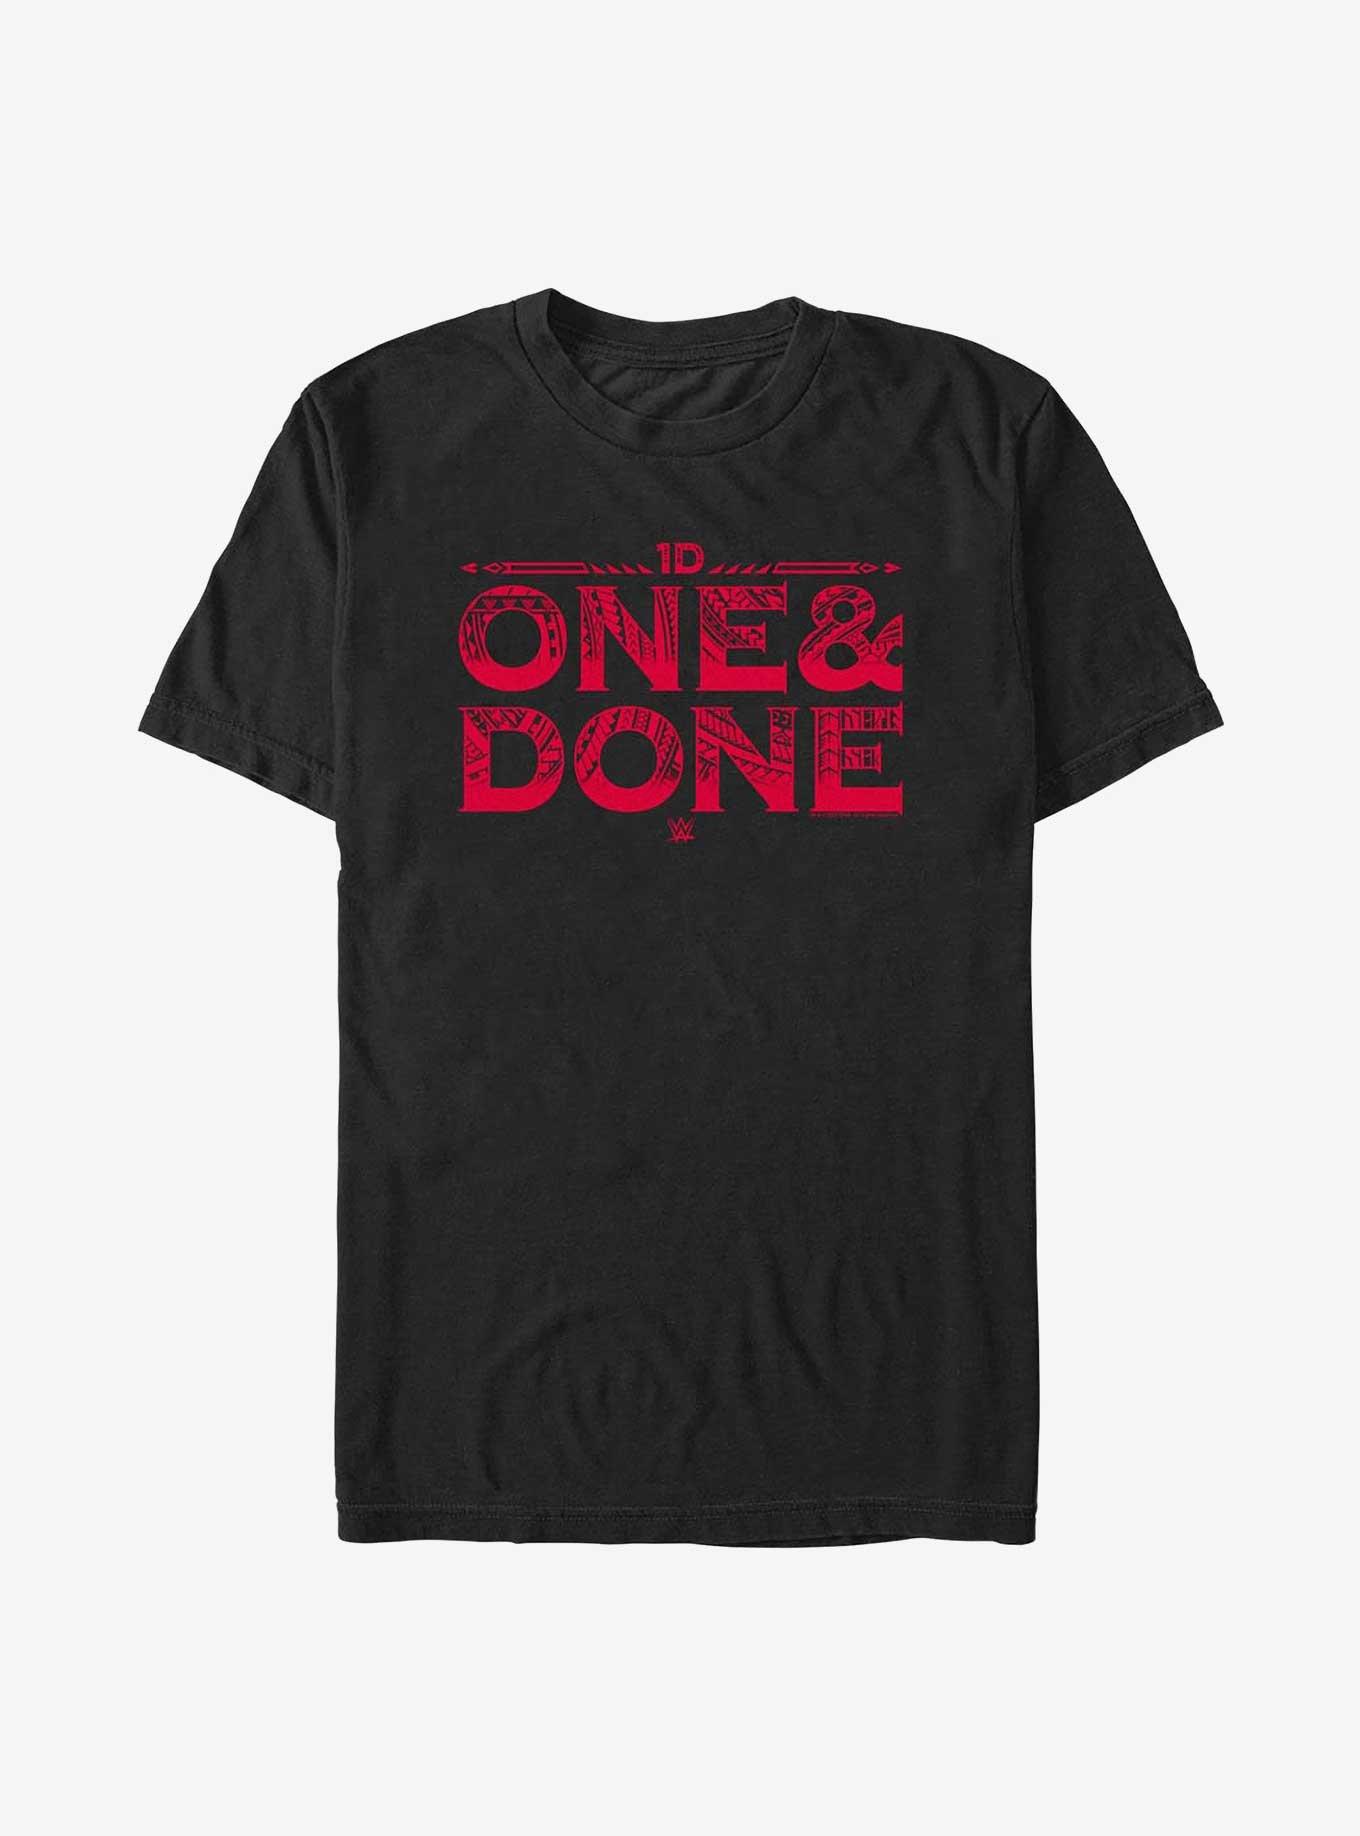 WWE The Usos One & Done T-Shirt, BLACK, hi-res